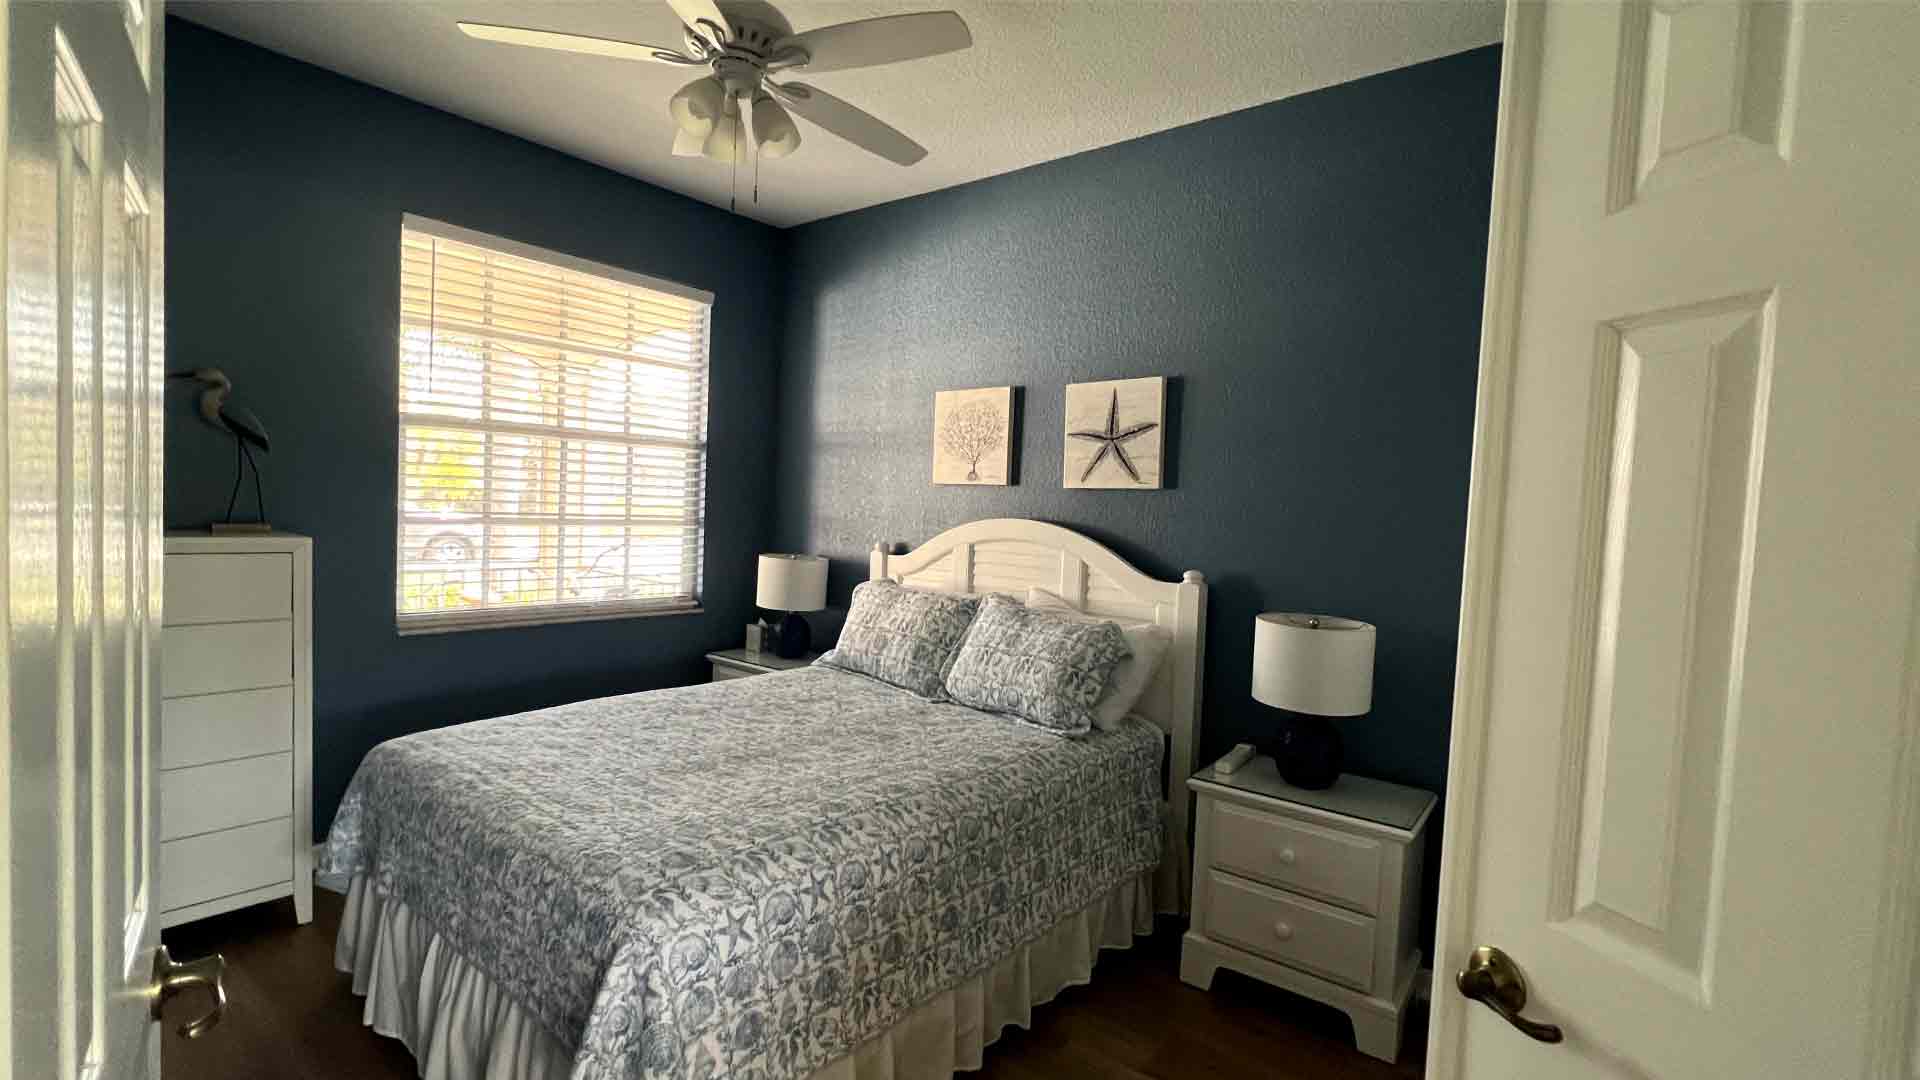 Master bedroom cleaning - Deep cleaning in Cape Coral by Goldmillio - Feb 19